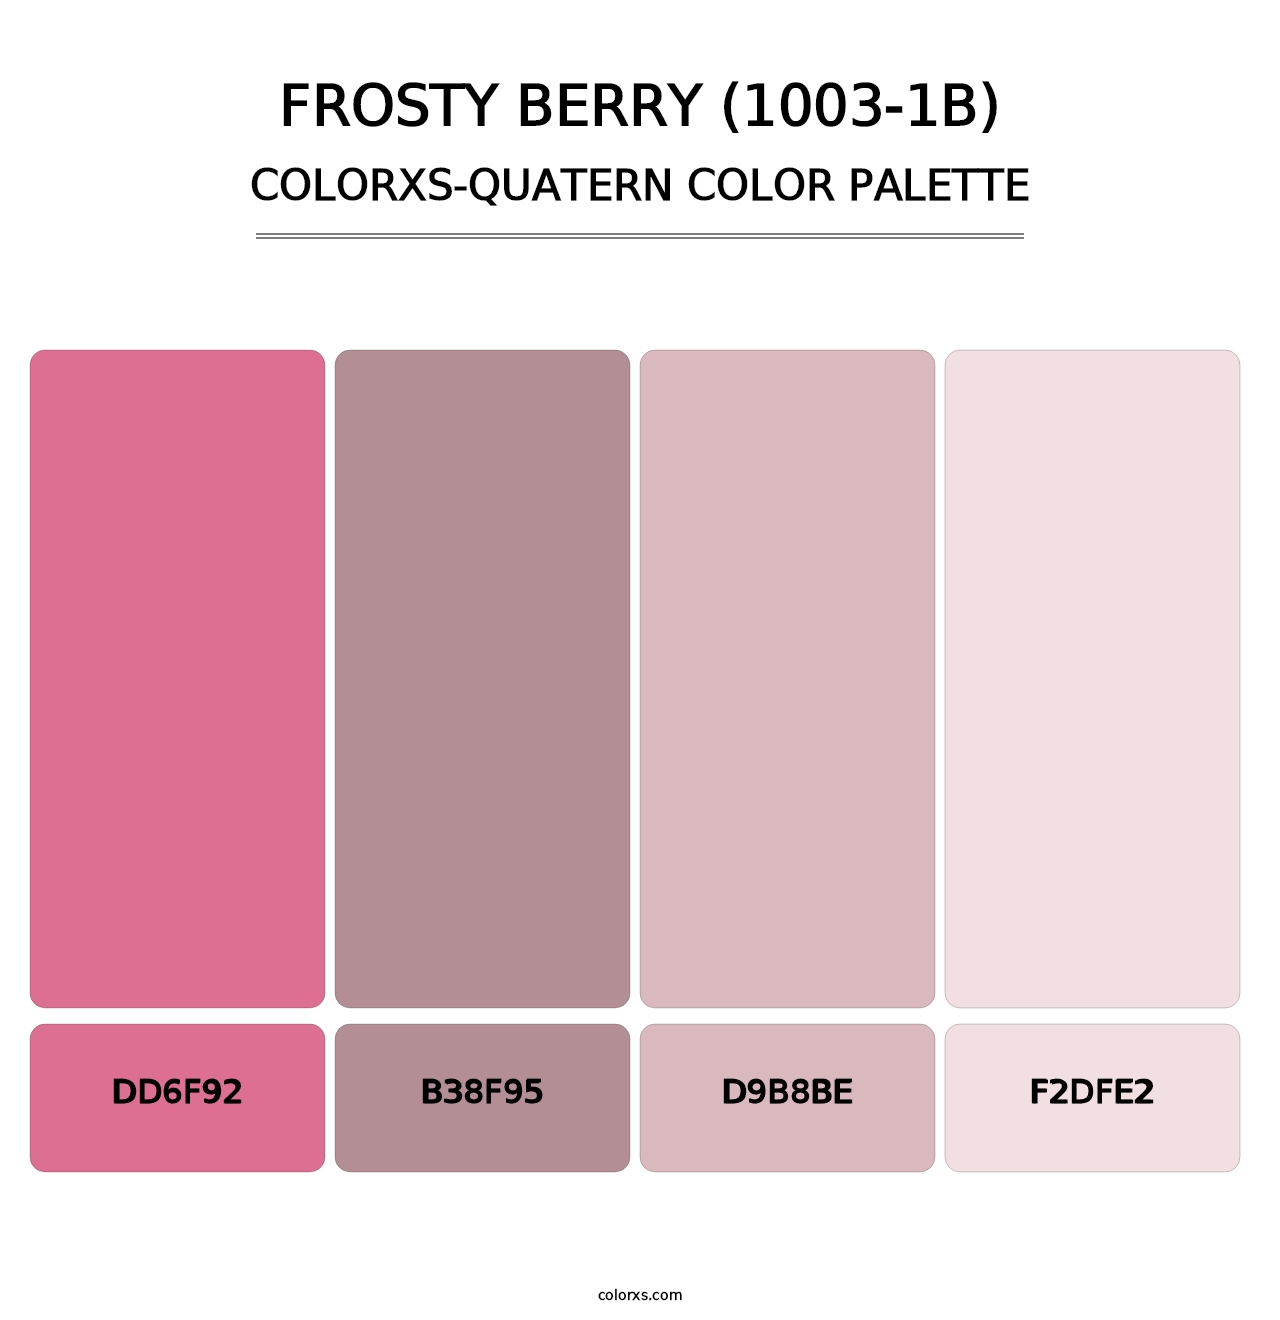 Frosty Berry (1003-1B) - Colorxs Quatern Palette